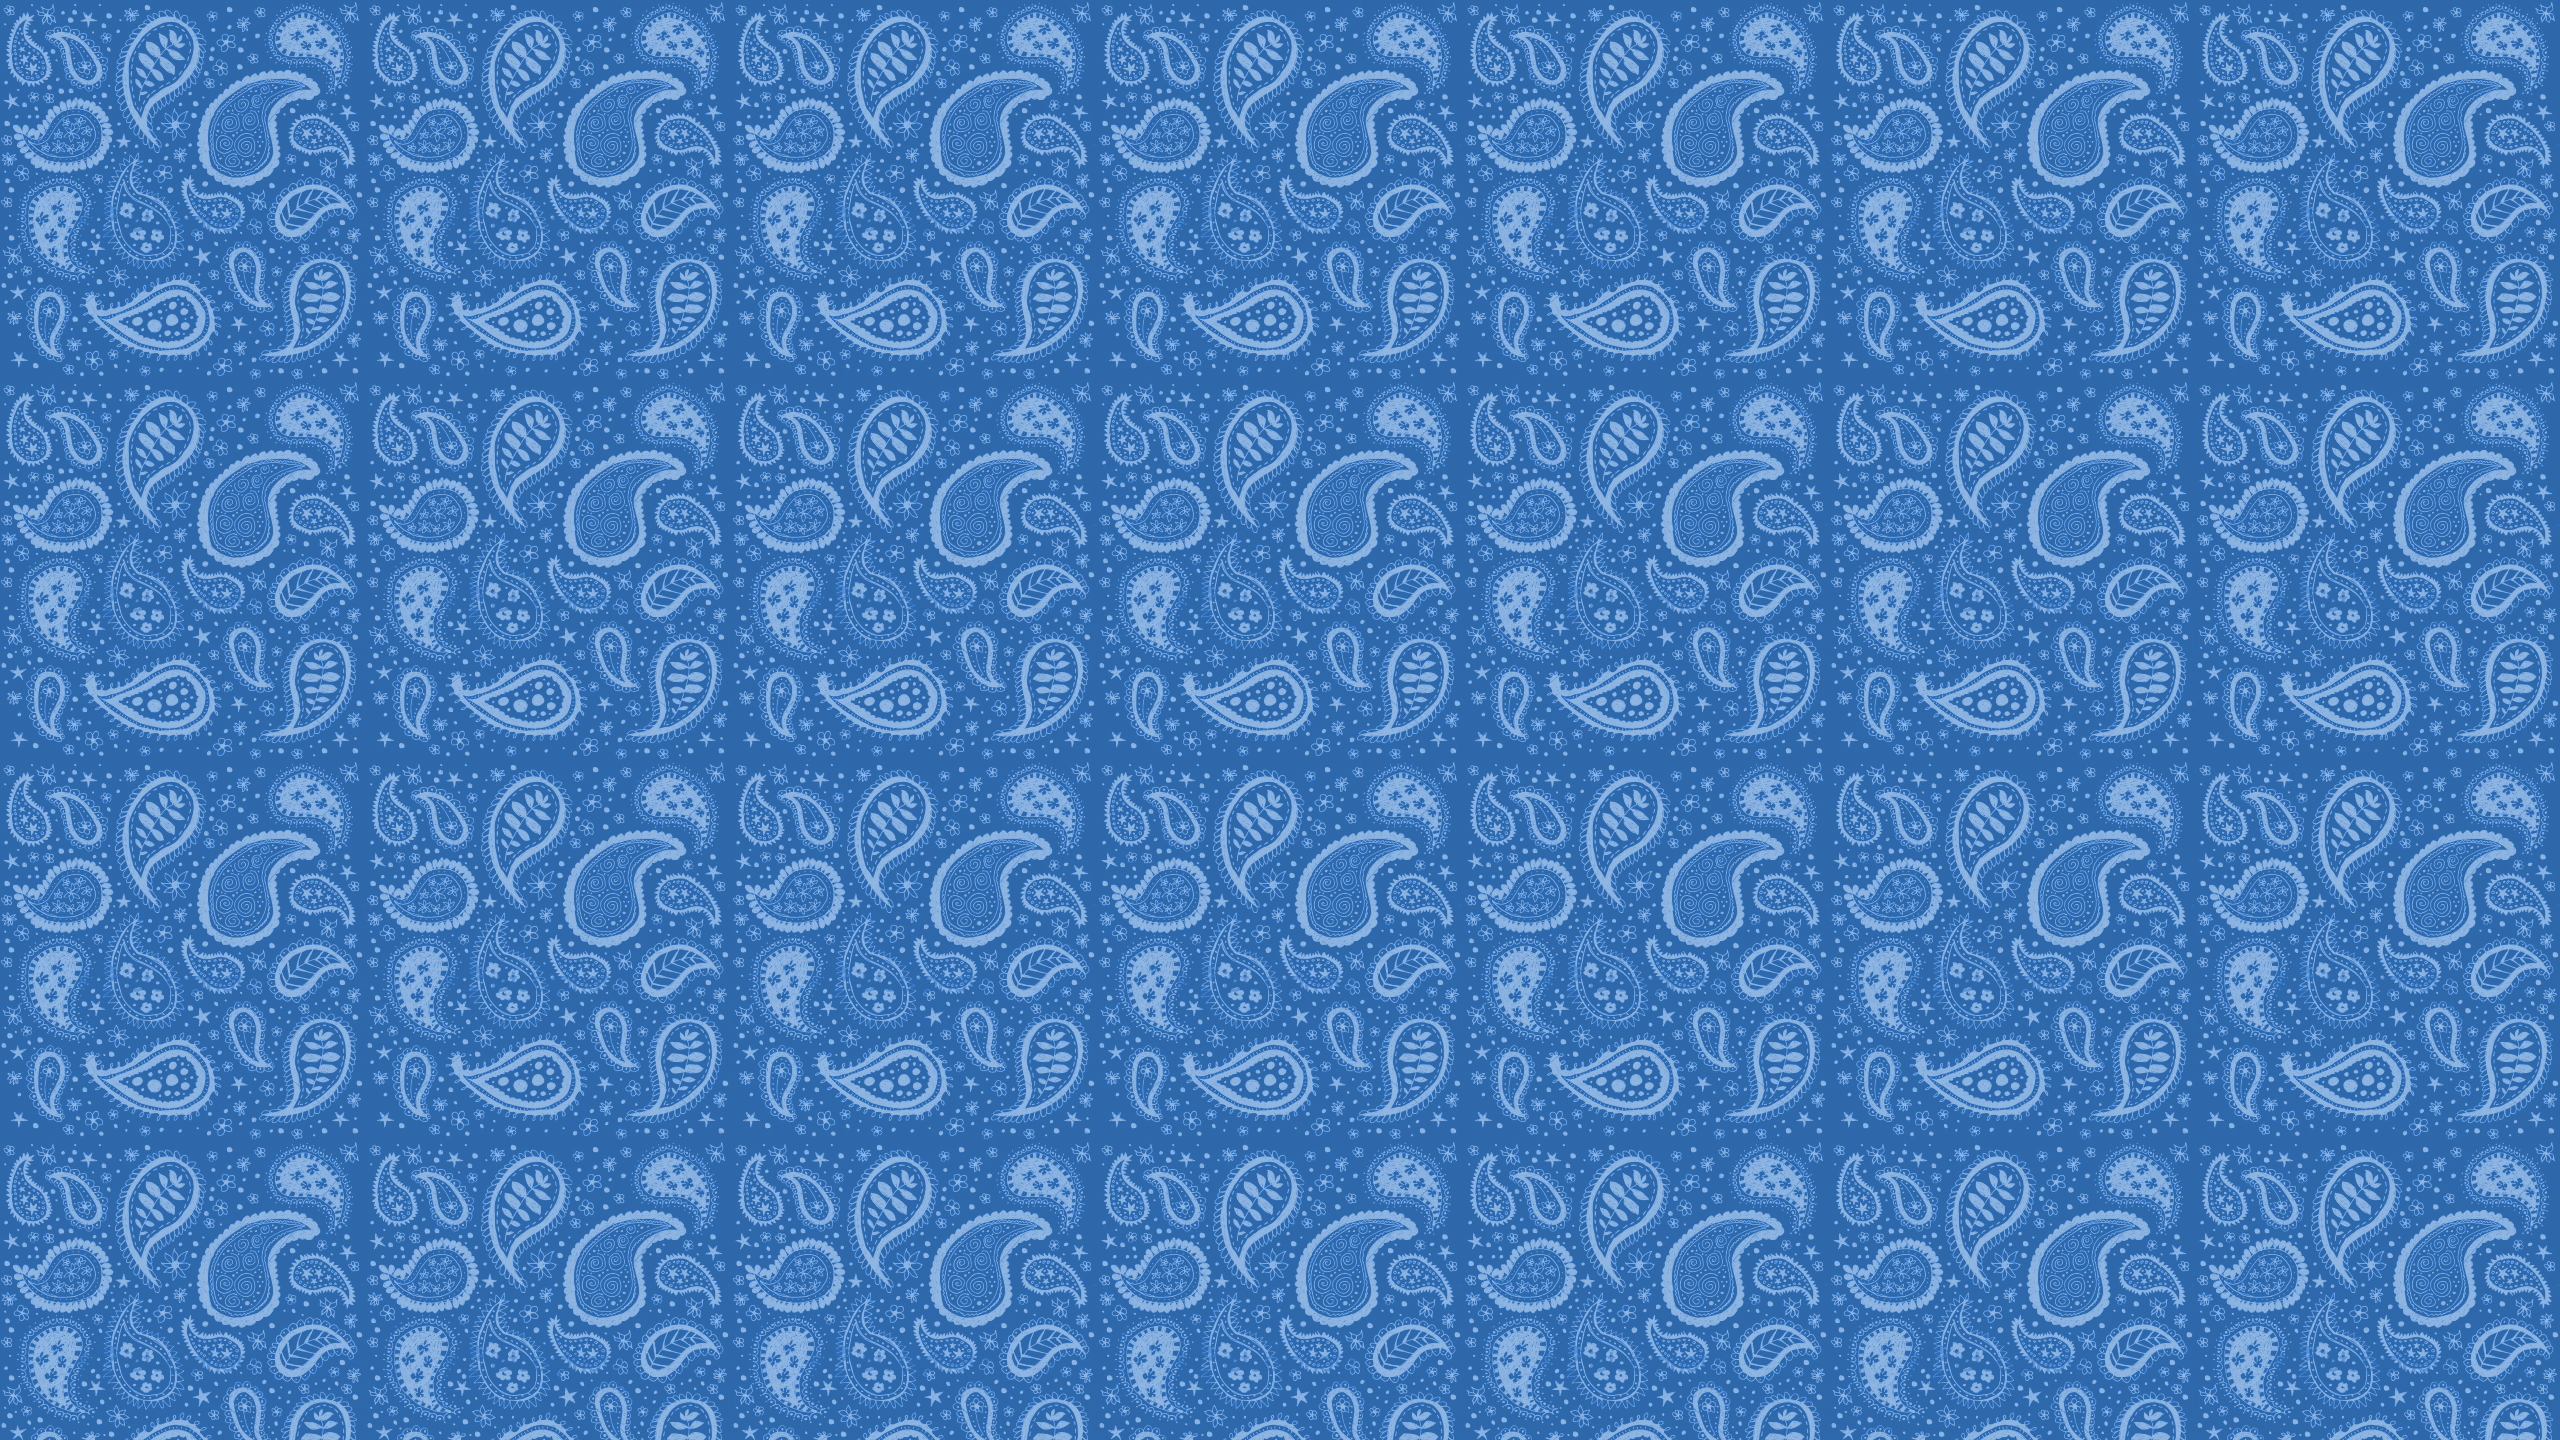 This Blue Paisley Desktop Wallpaper Is Easy Just Save The